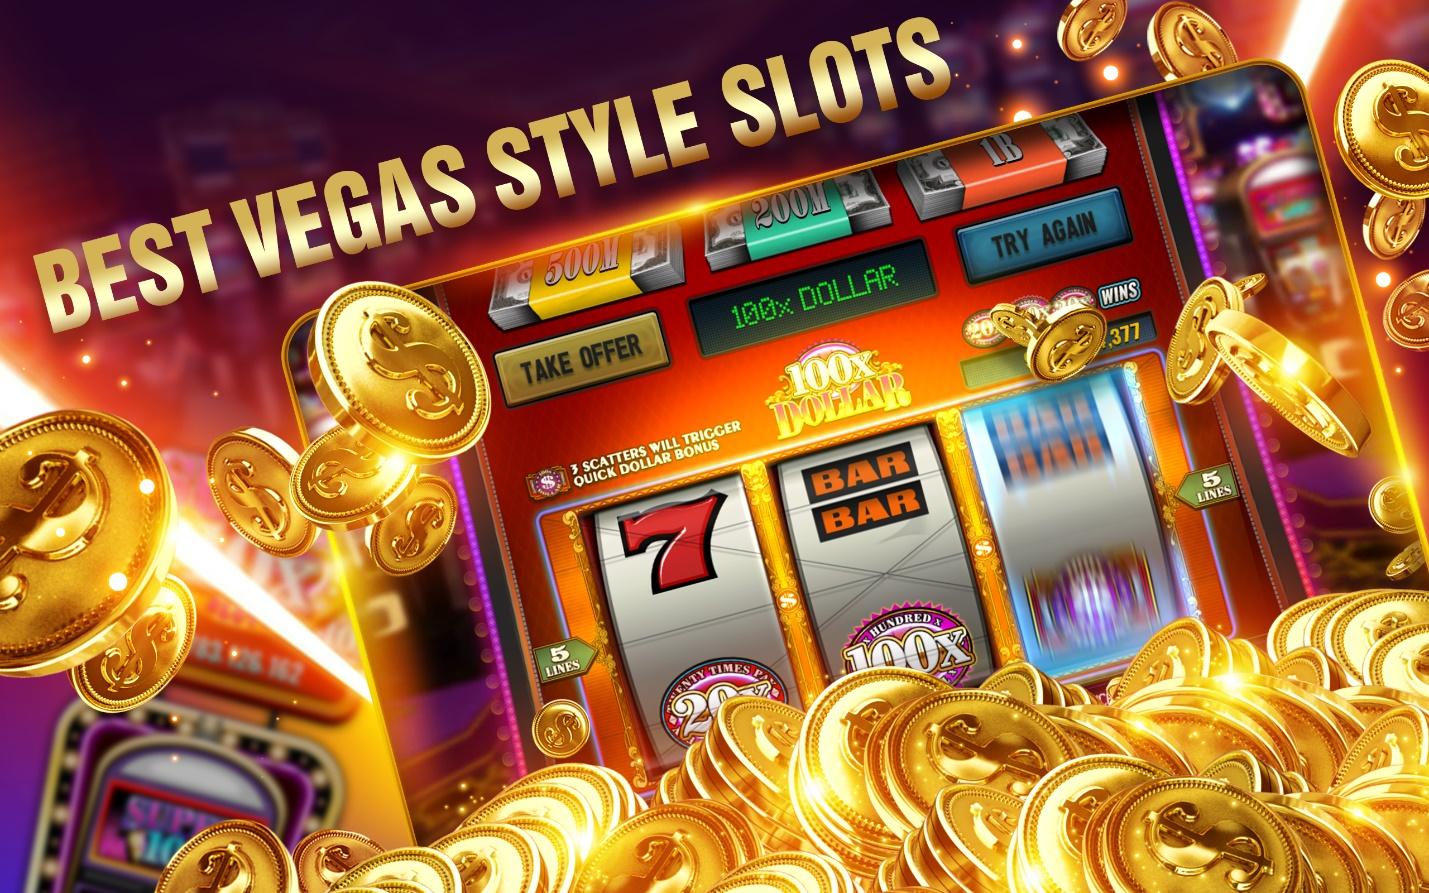 Vegas Live Slots : Free Casino Slot Machine Games:Amazon.com:Appstore for Android